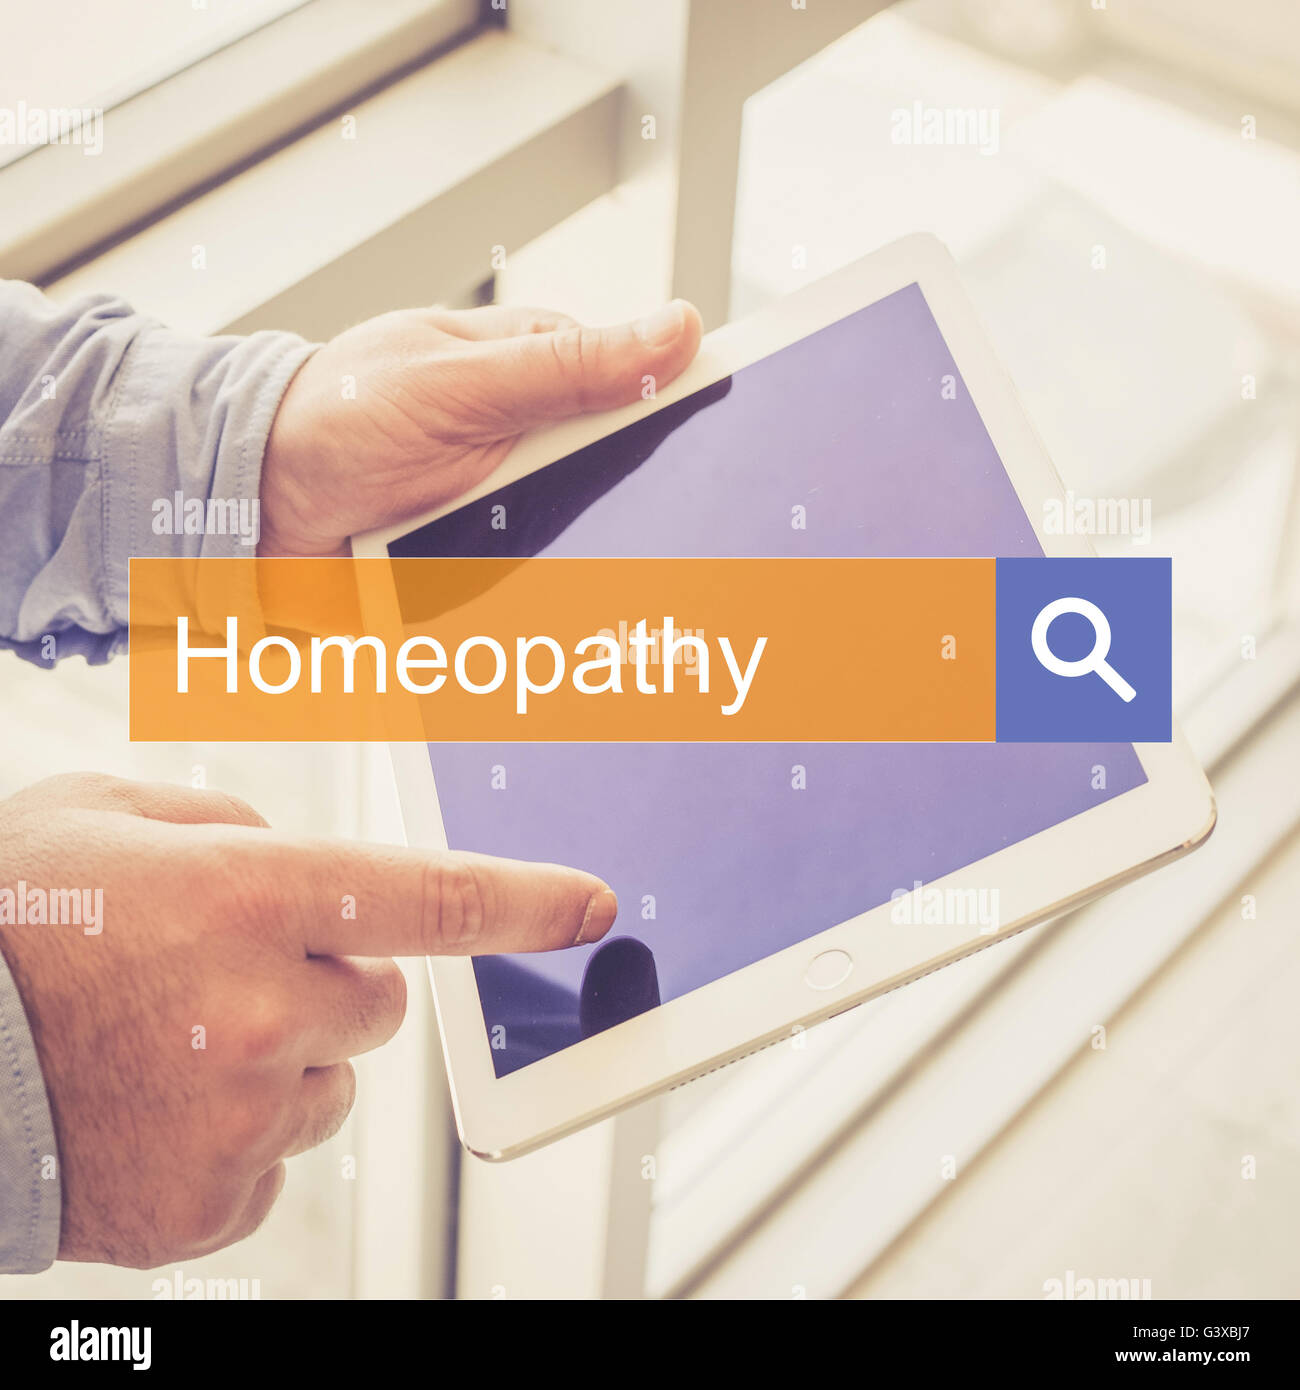 SEARCHING TECHNOLOGY HEALTH Homeopathy COMMUNICATION CONCEPT Stock Photo